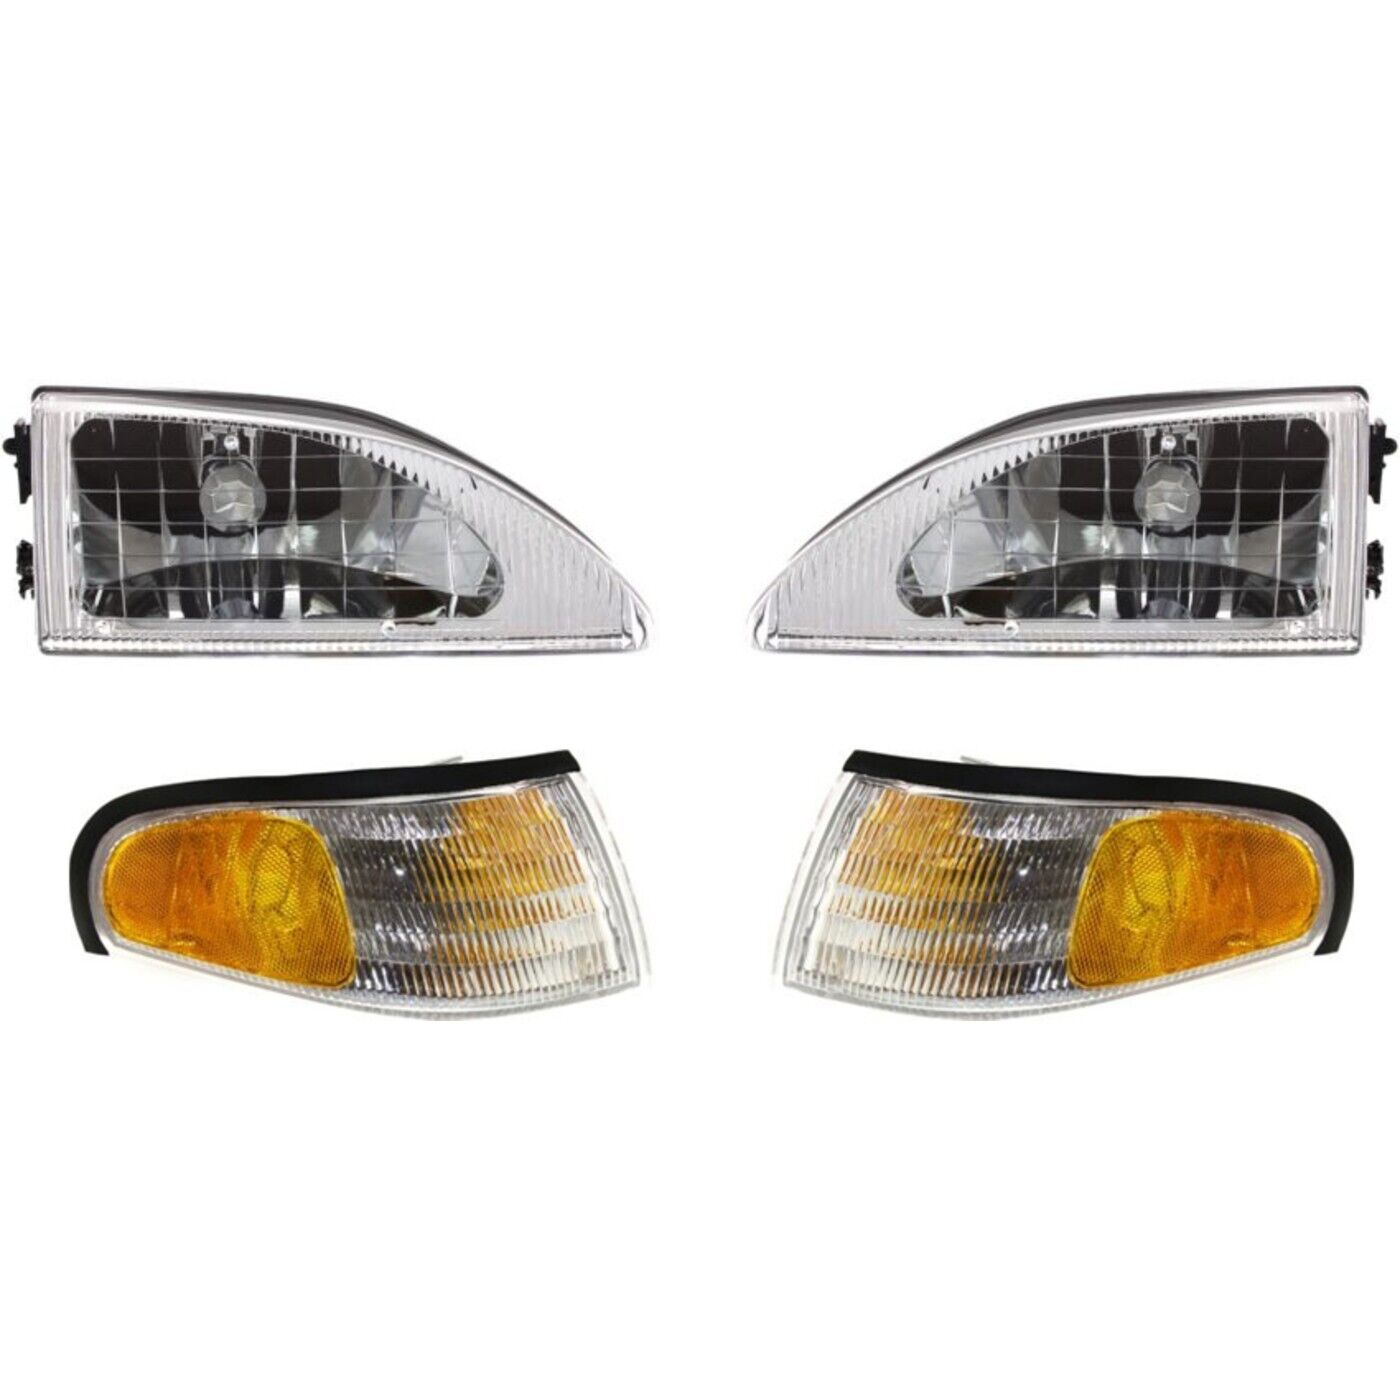 Headlight Kit For 1994-1998 Ford Mustang Left and Right With Corner Lights